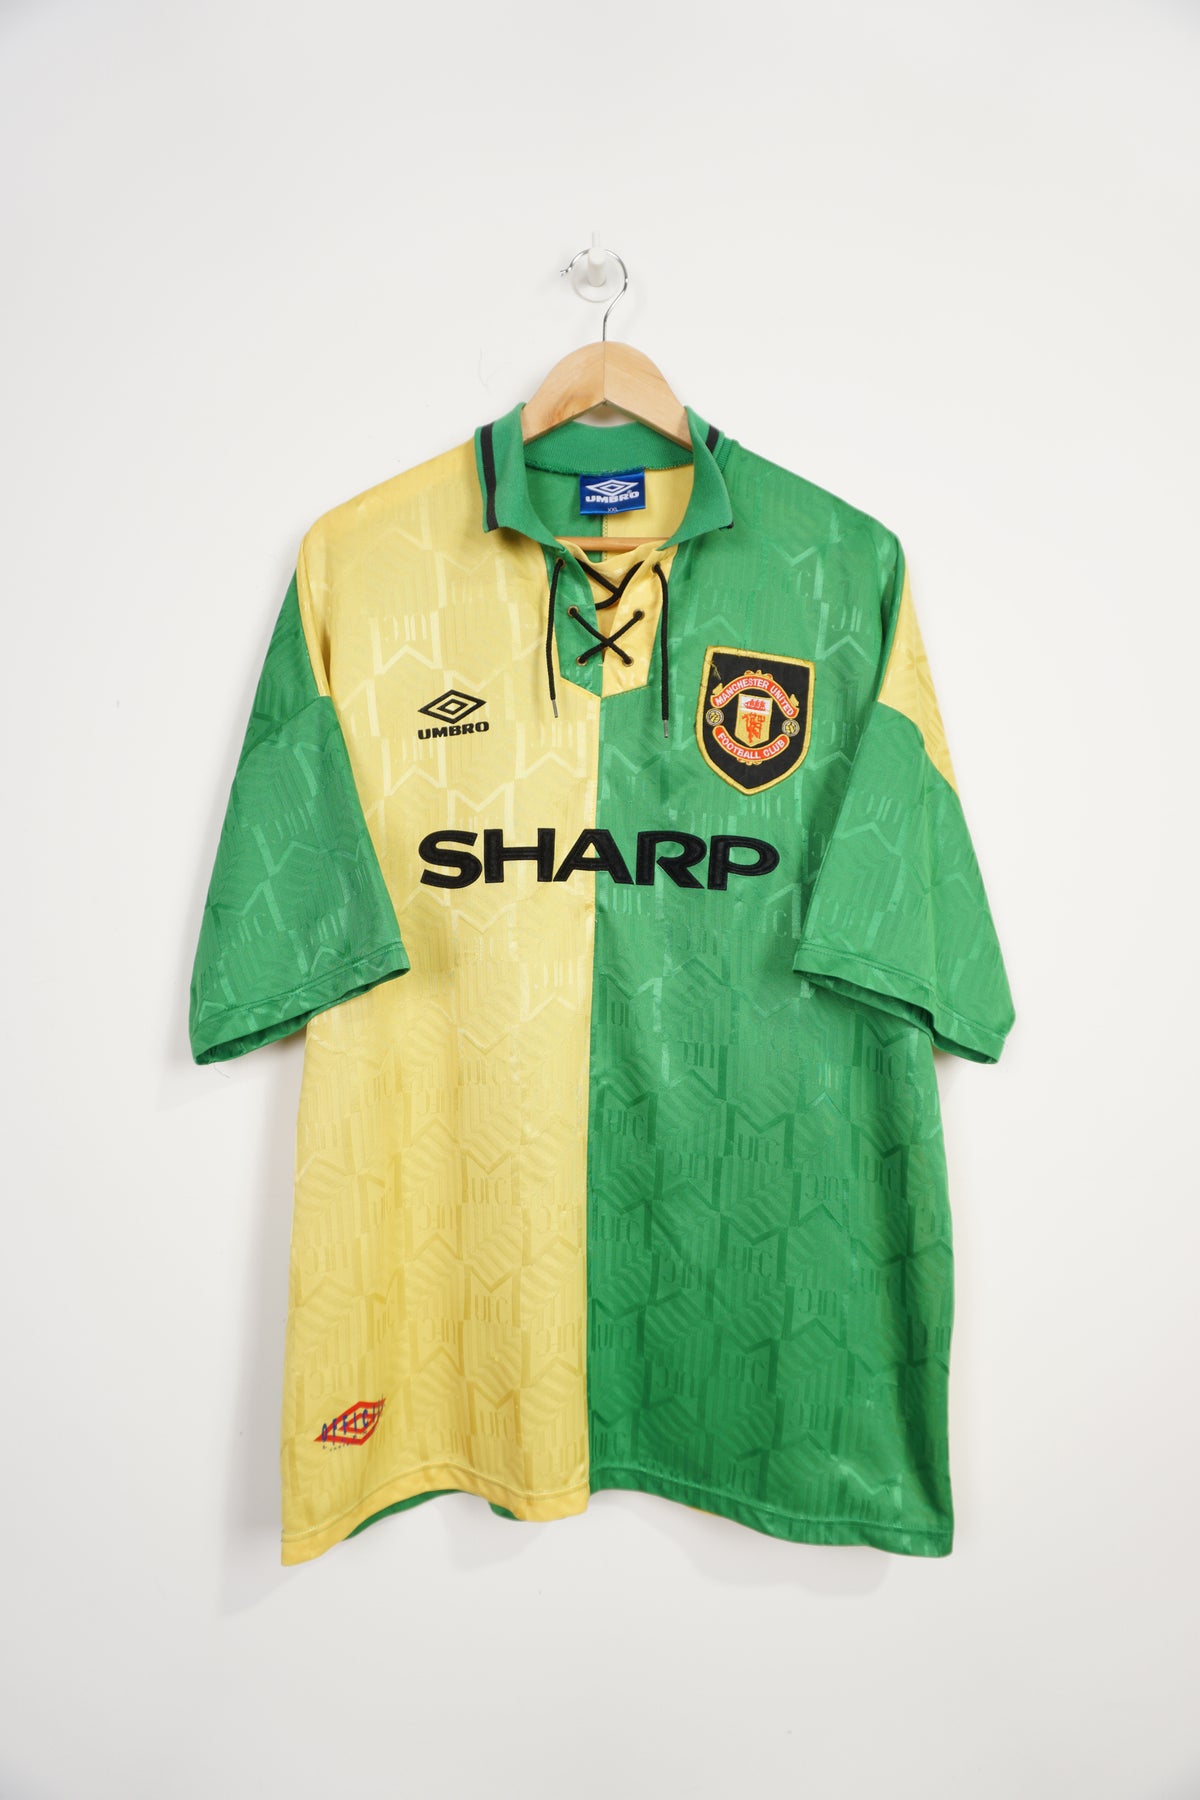 Vintage 1992-94 Manchester United Umbro Football Jersey size XL green  yellow